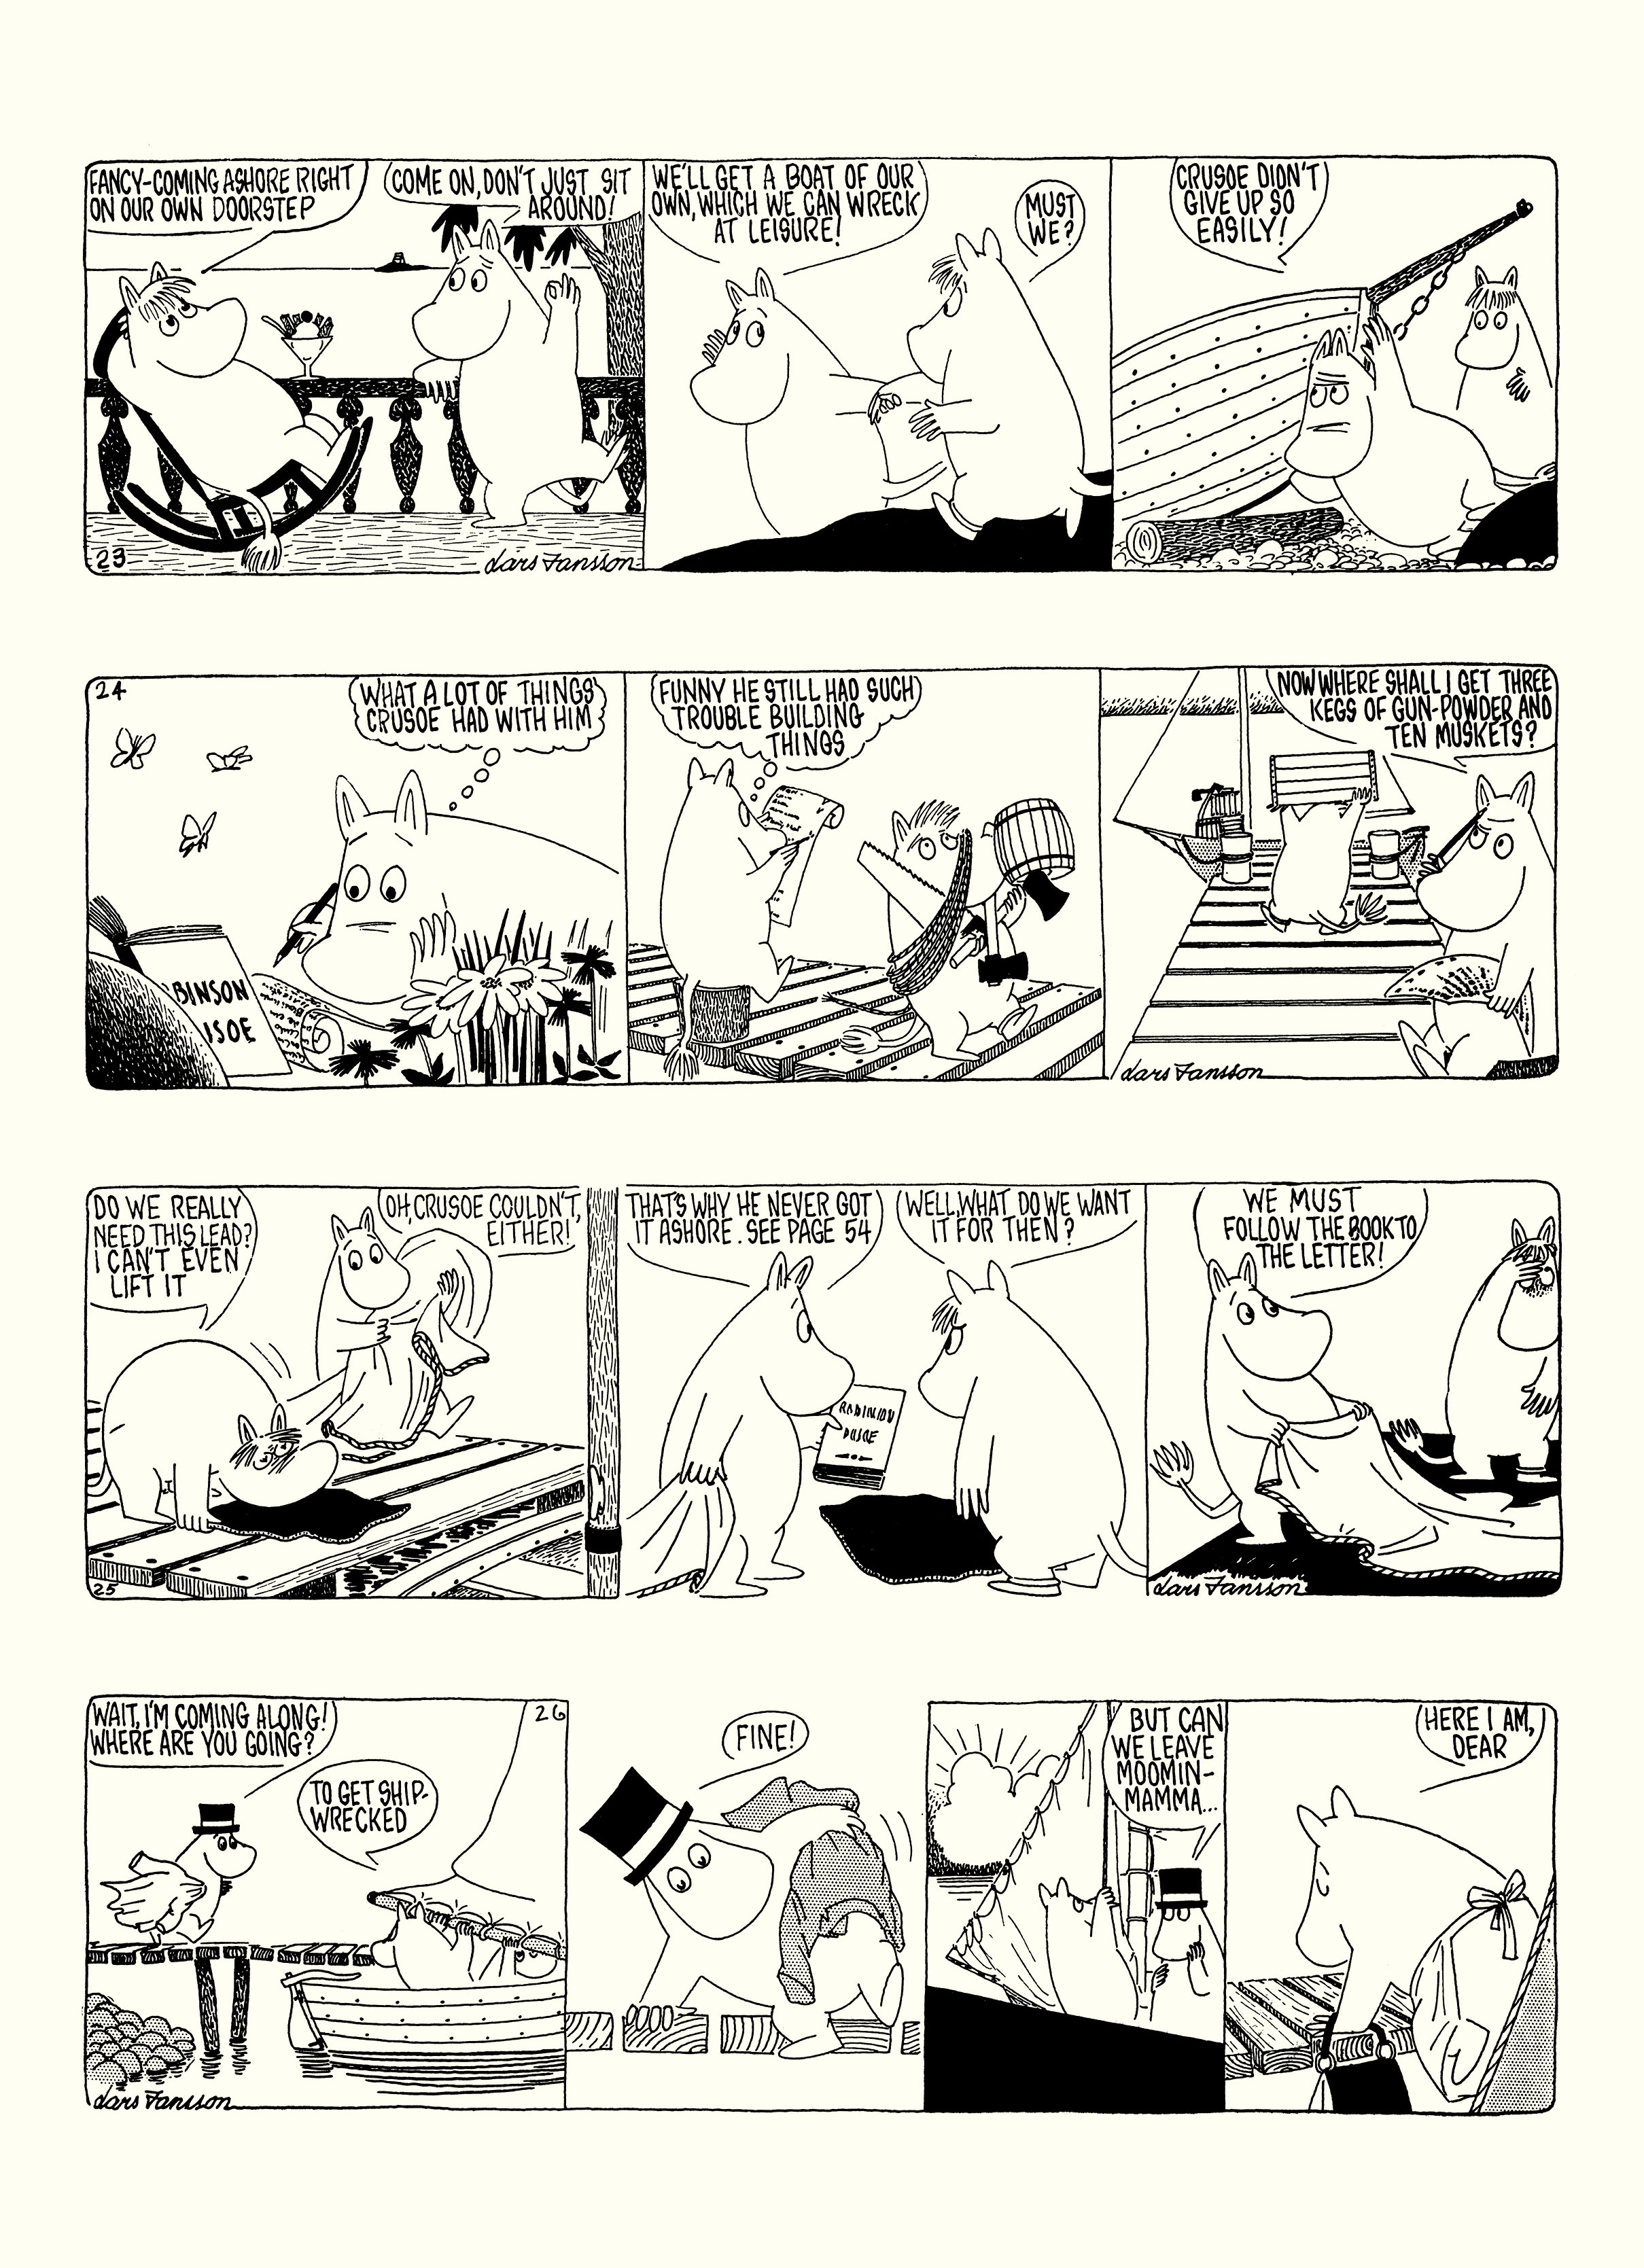 Read online Moomin: The Complete Lars Jansson Comic Strip comic -  Issue # TPB 8 - 11